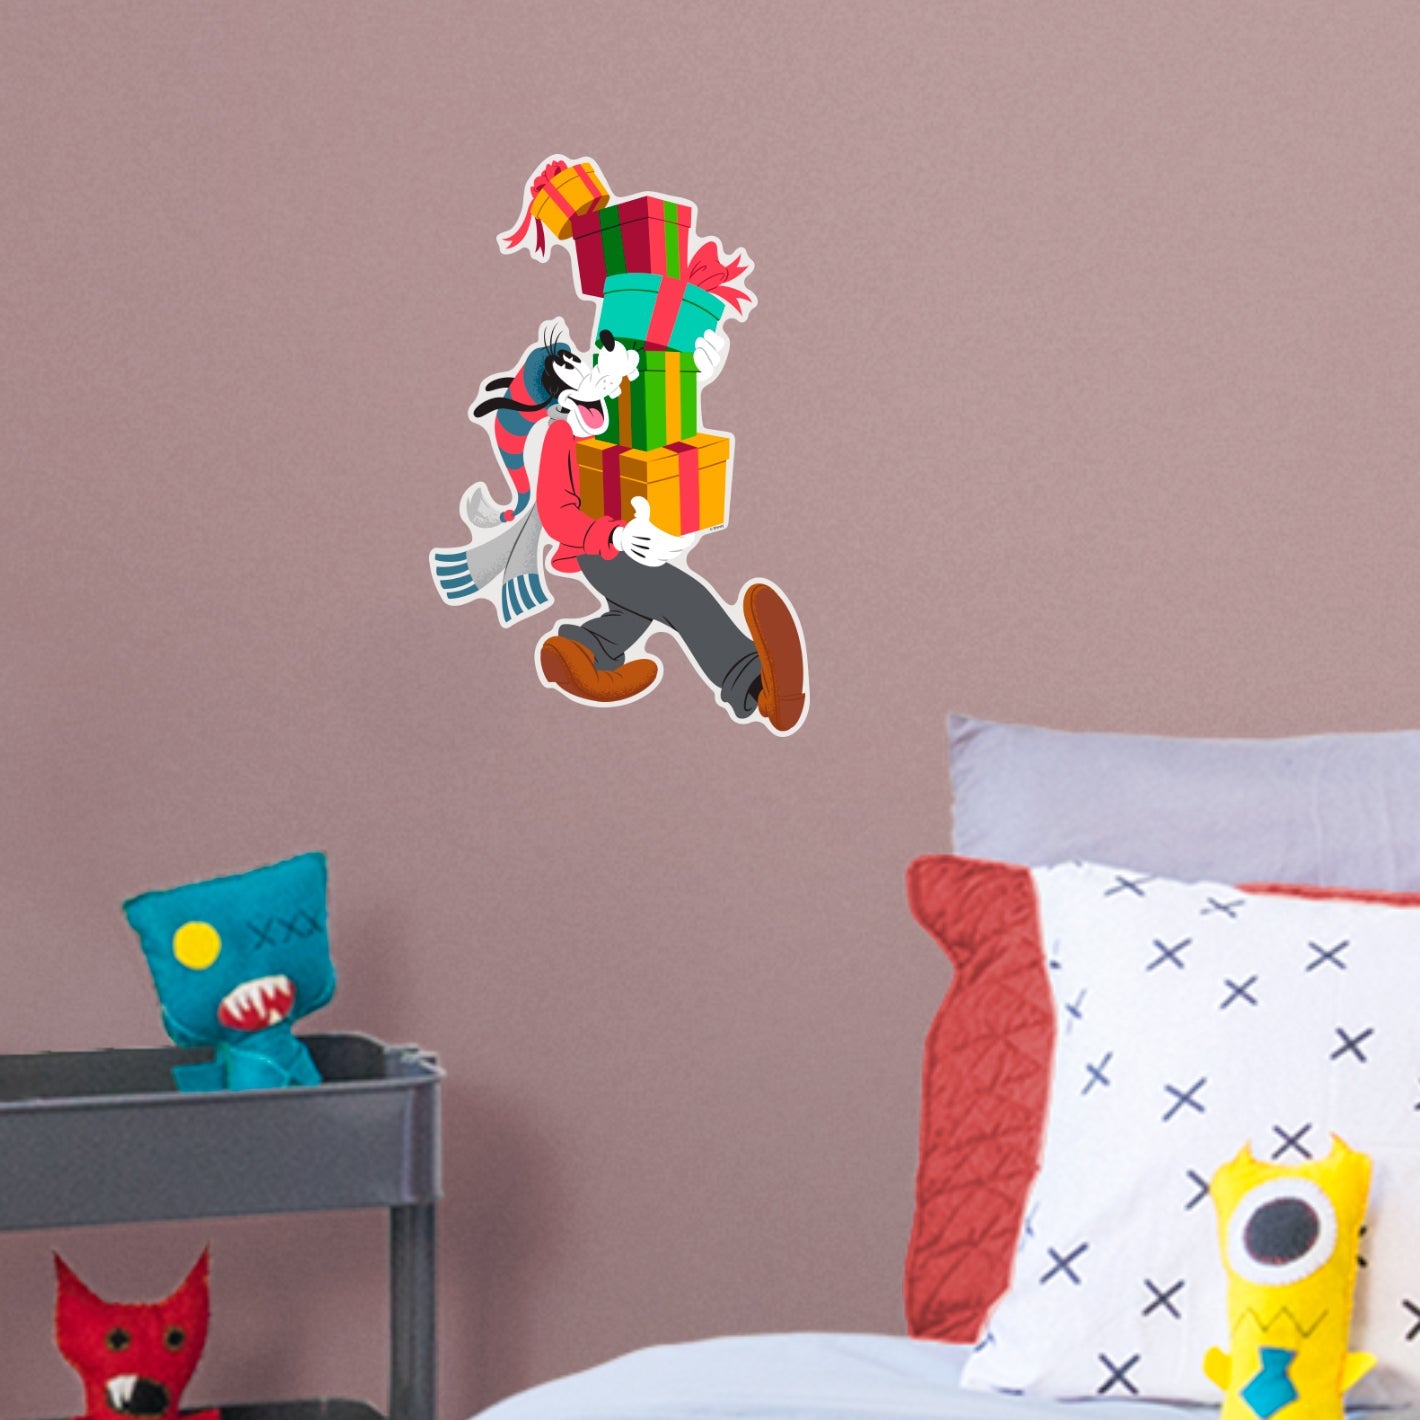 Festive Cheer: Goofy Holiday Real Big - Officially Licensed Disney Removable Adhesive Decal